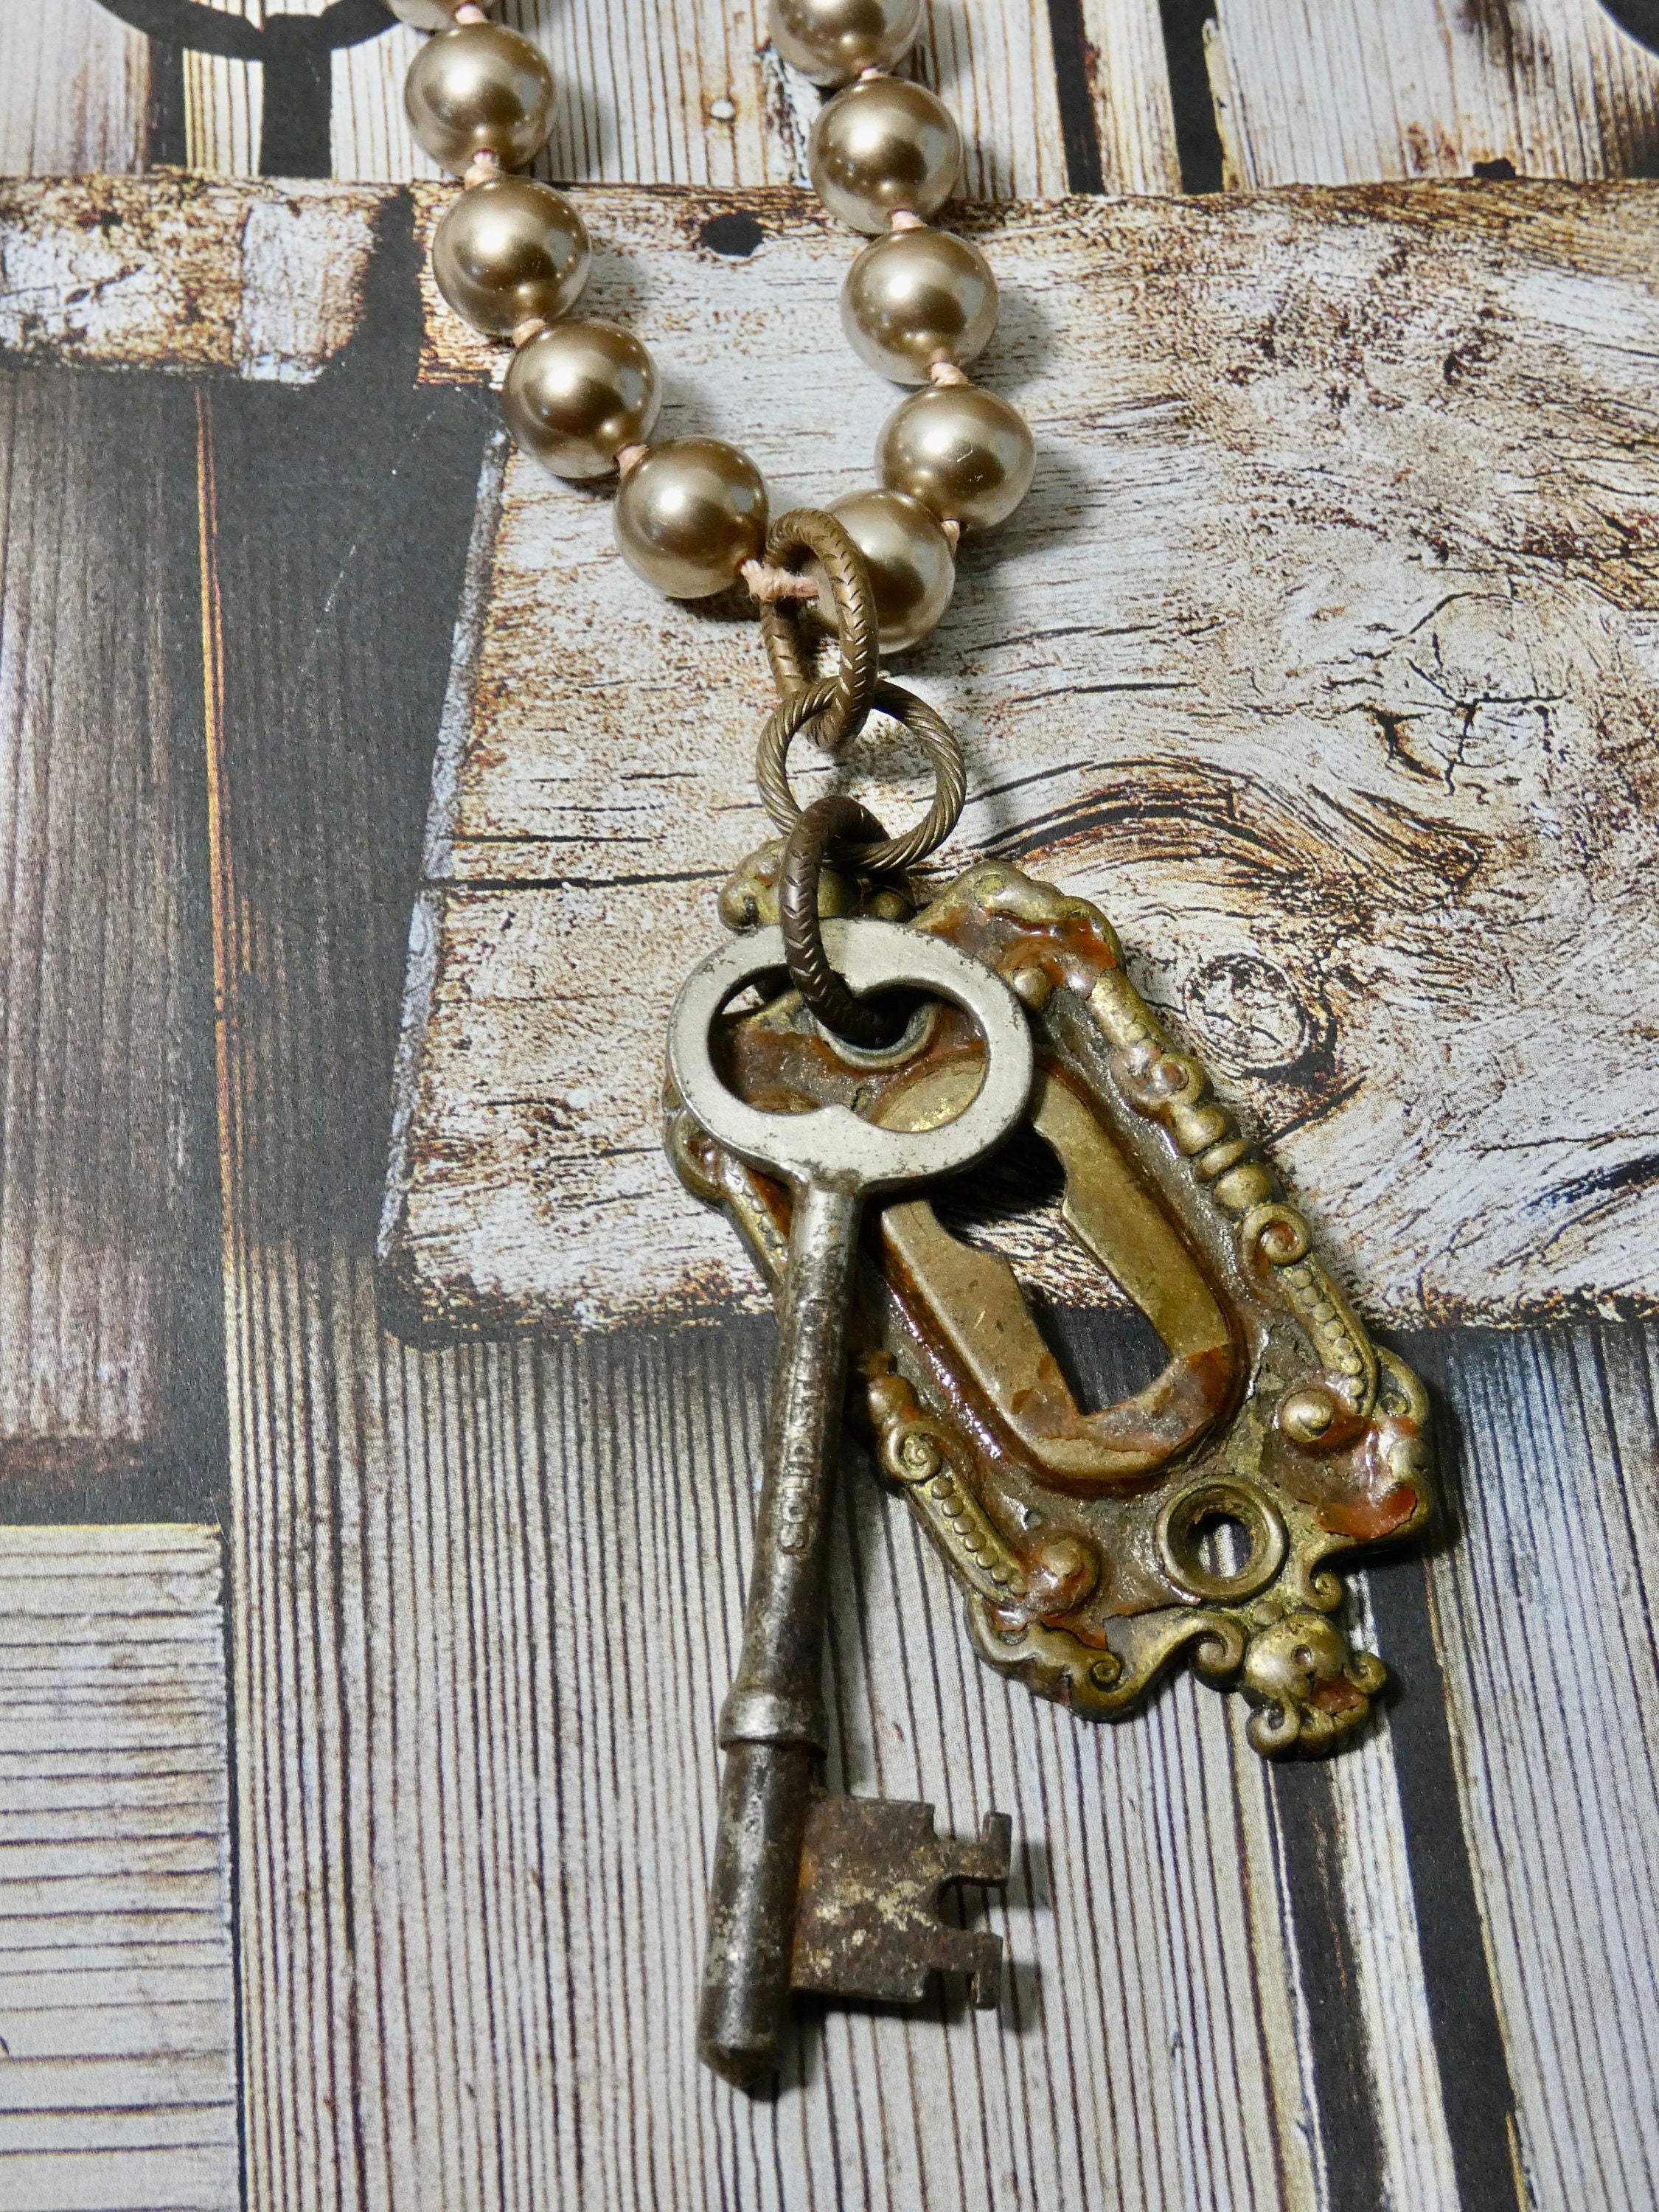 Vintage Skeleton Key and Keyhole Necklace with pearls